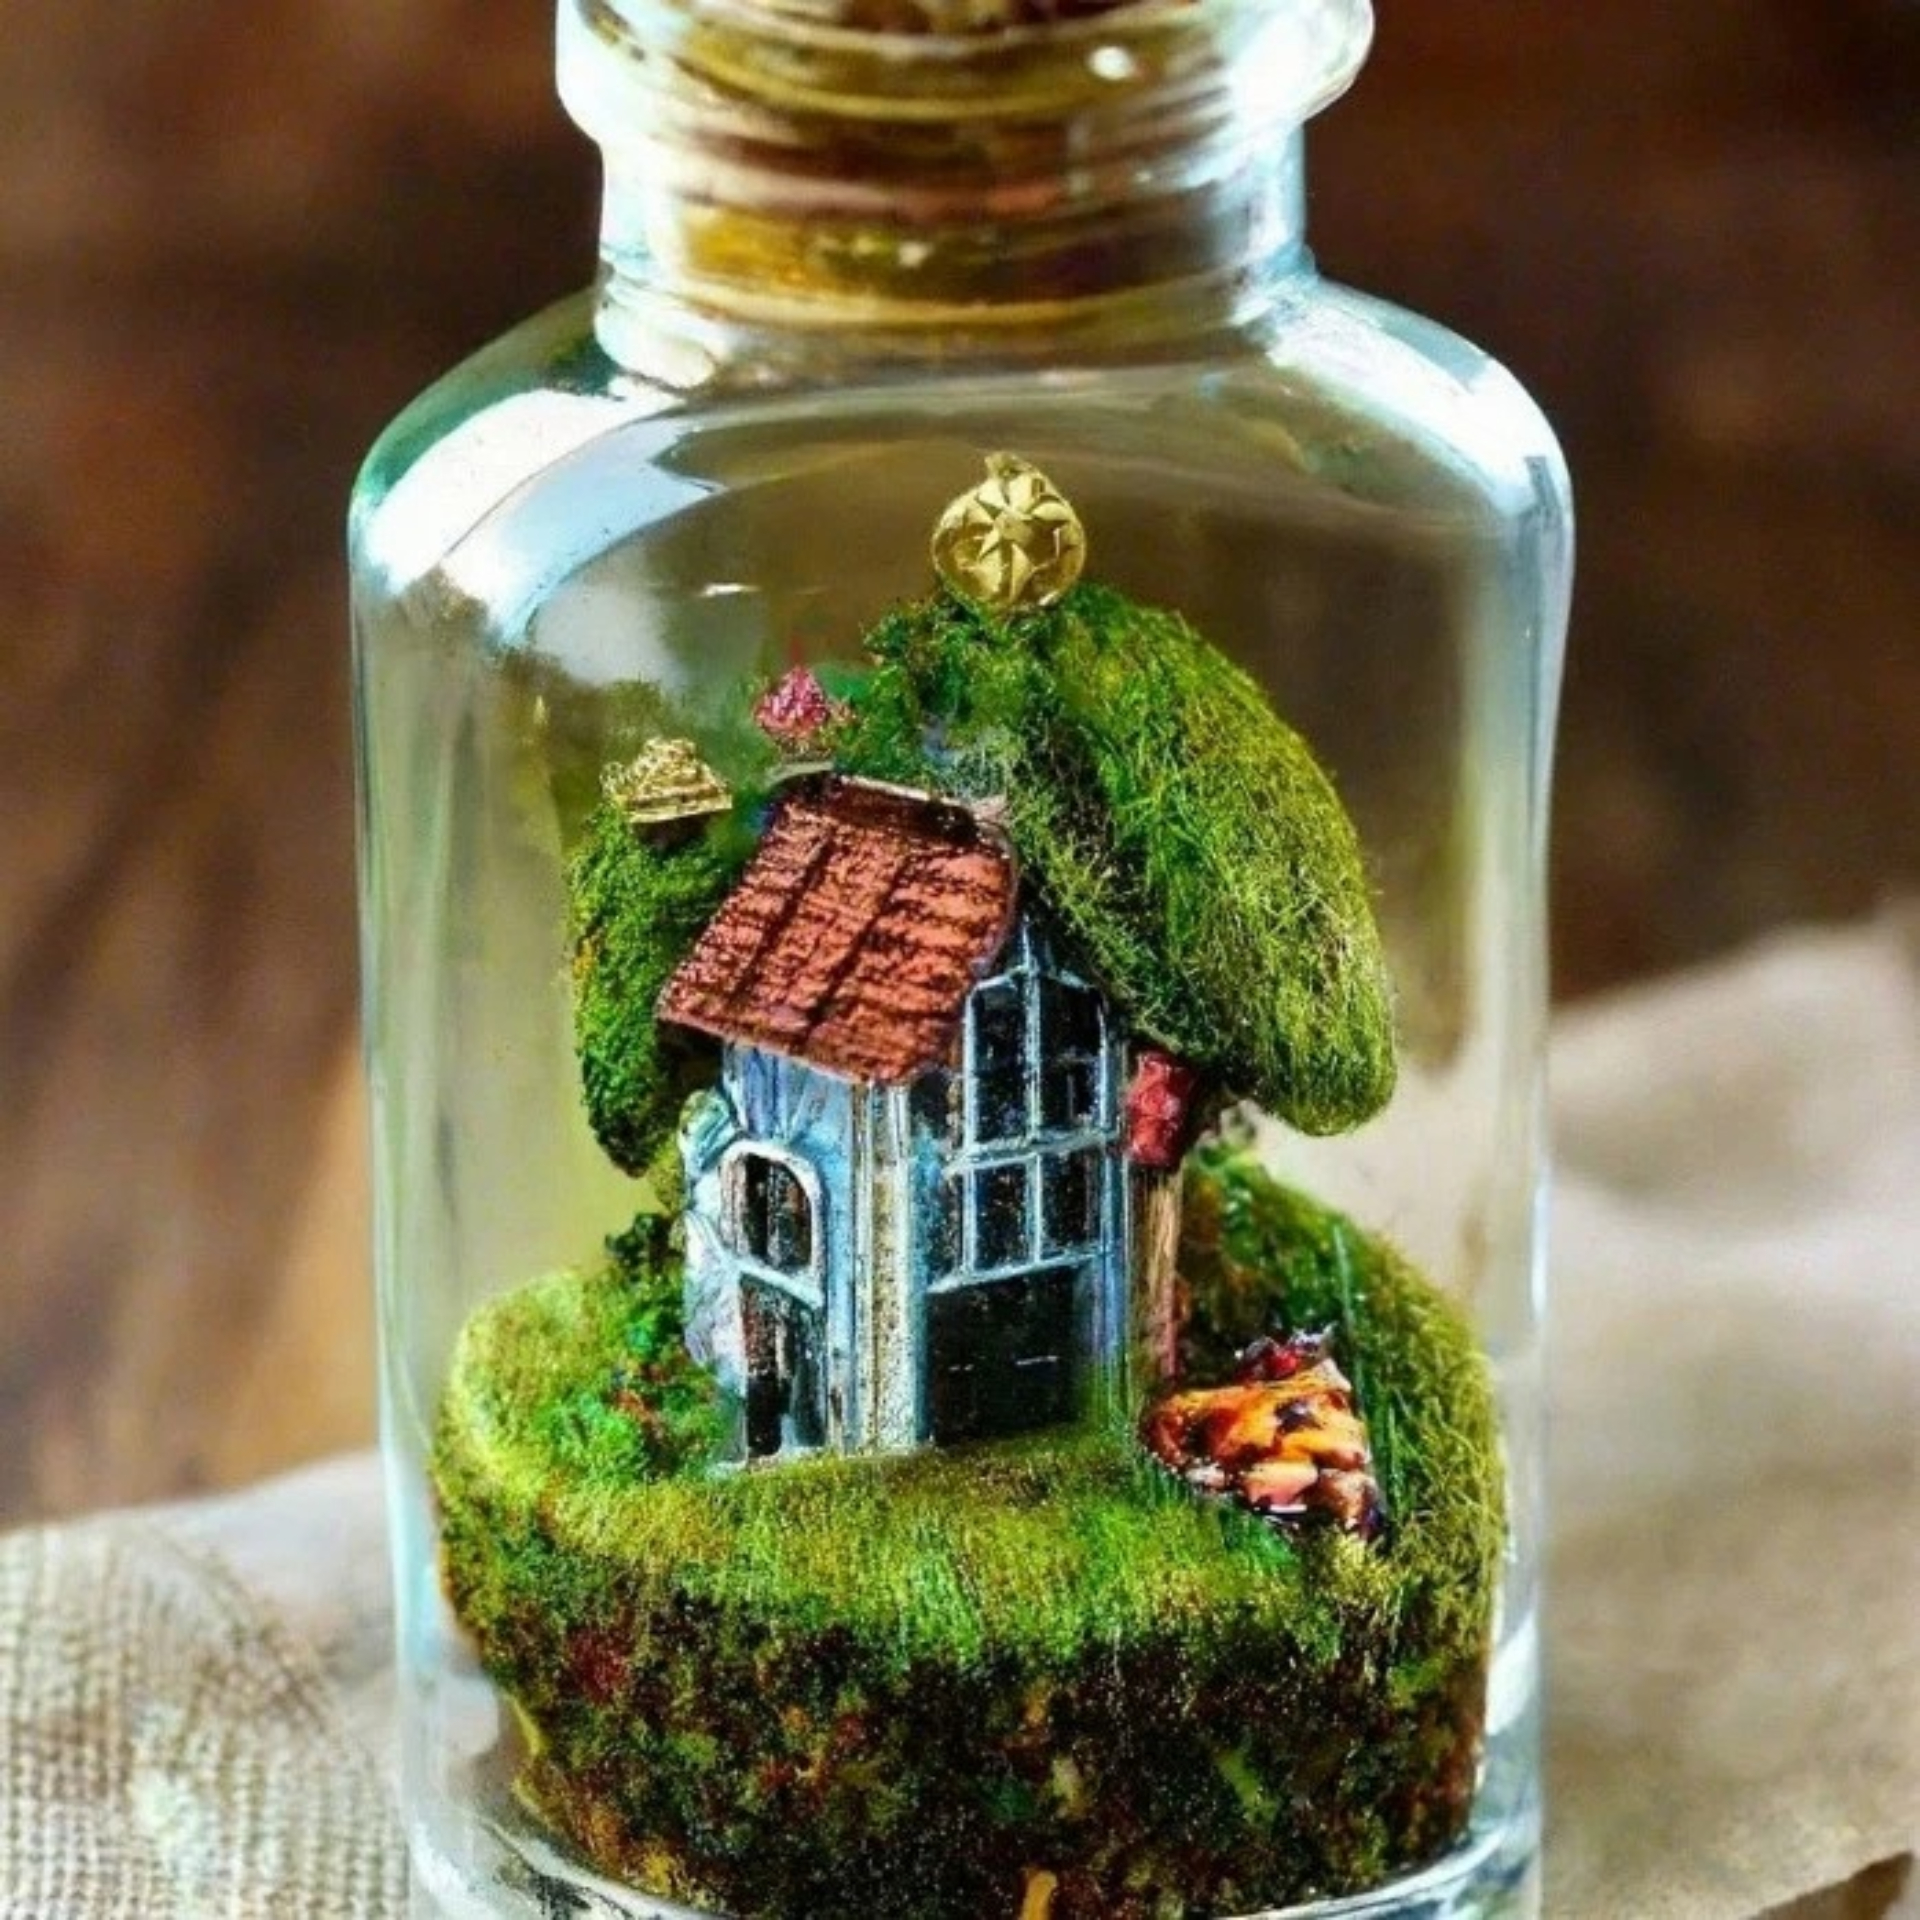 Free photo A small decorative house in a bottle